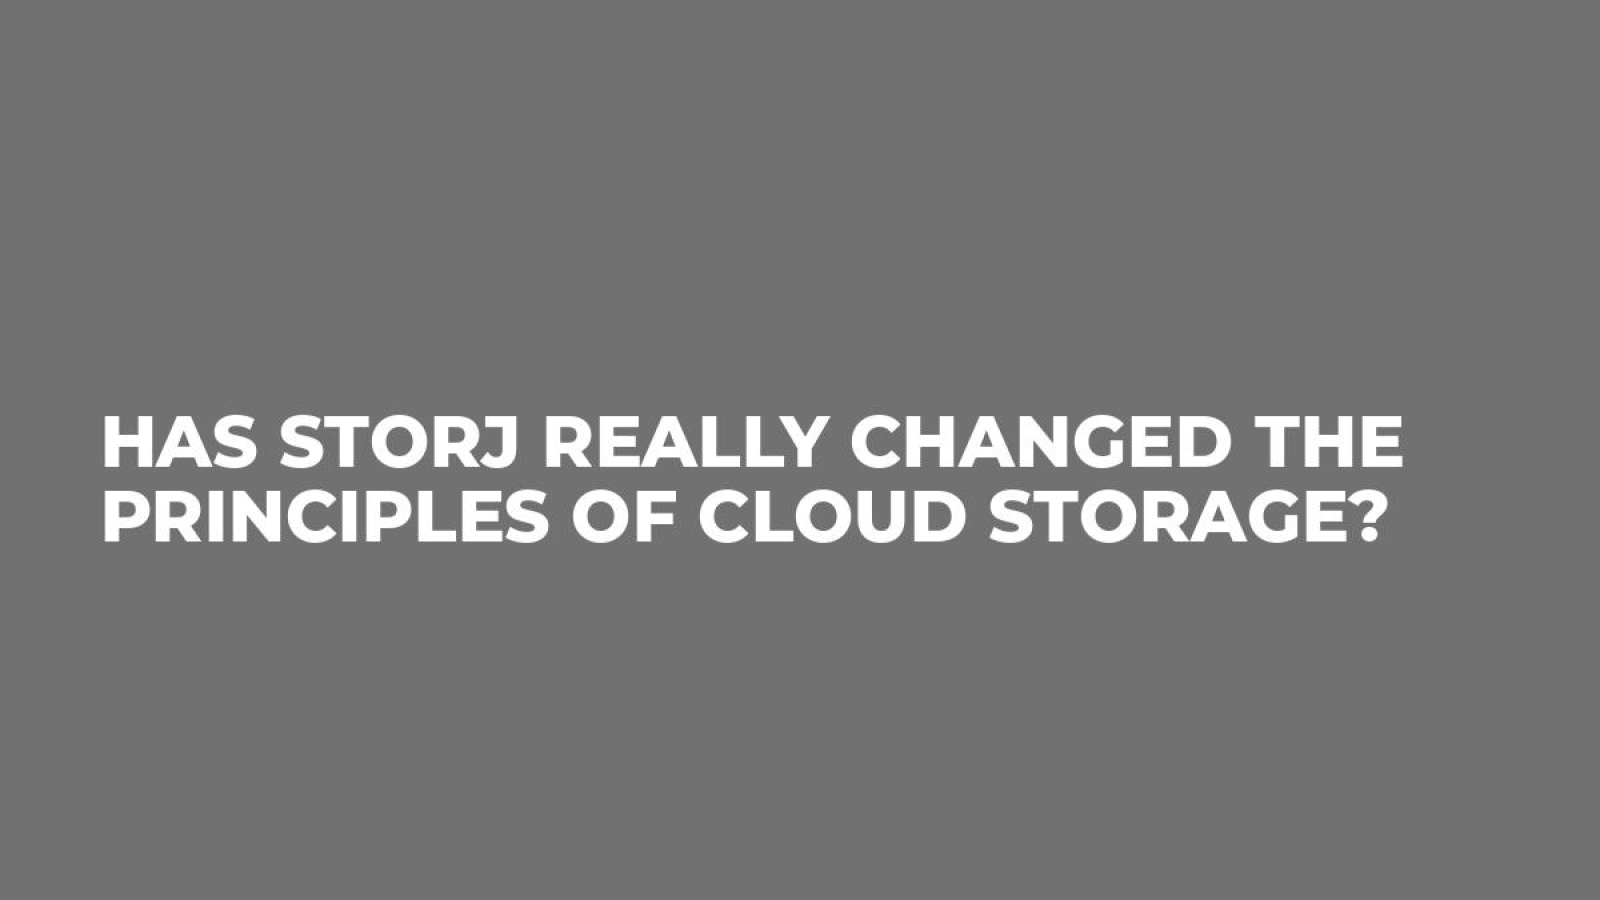 Has Storj Really Changed the Principles of Cloud Storage?